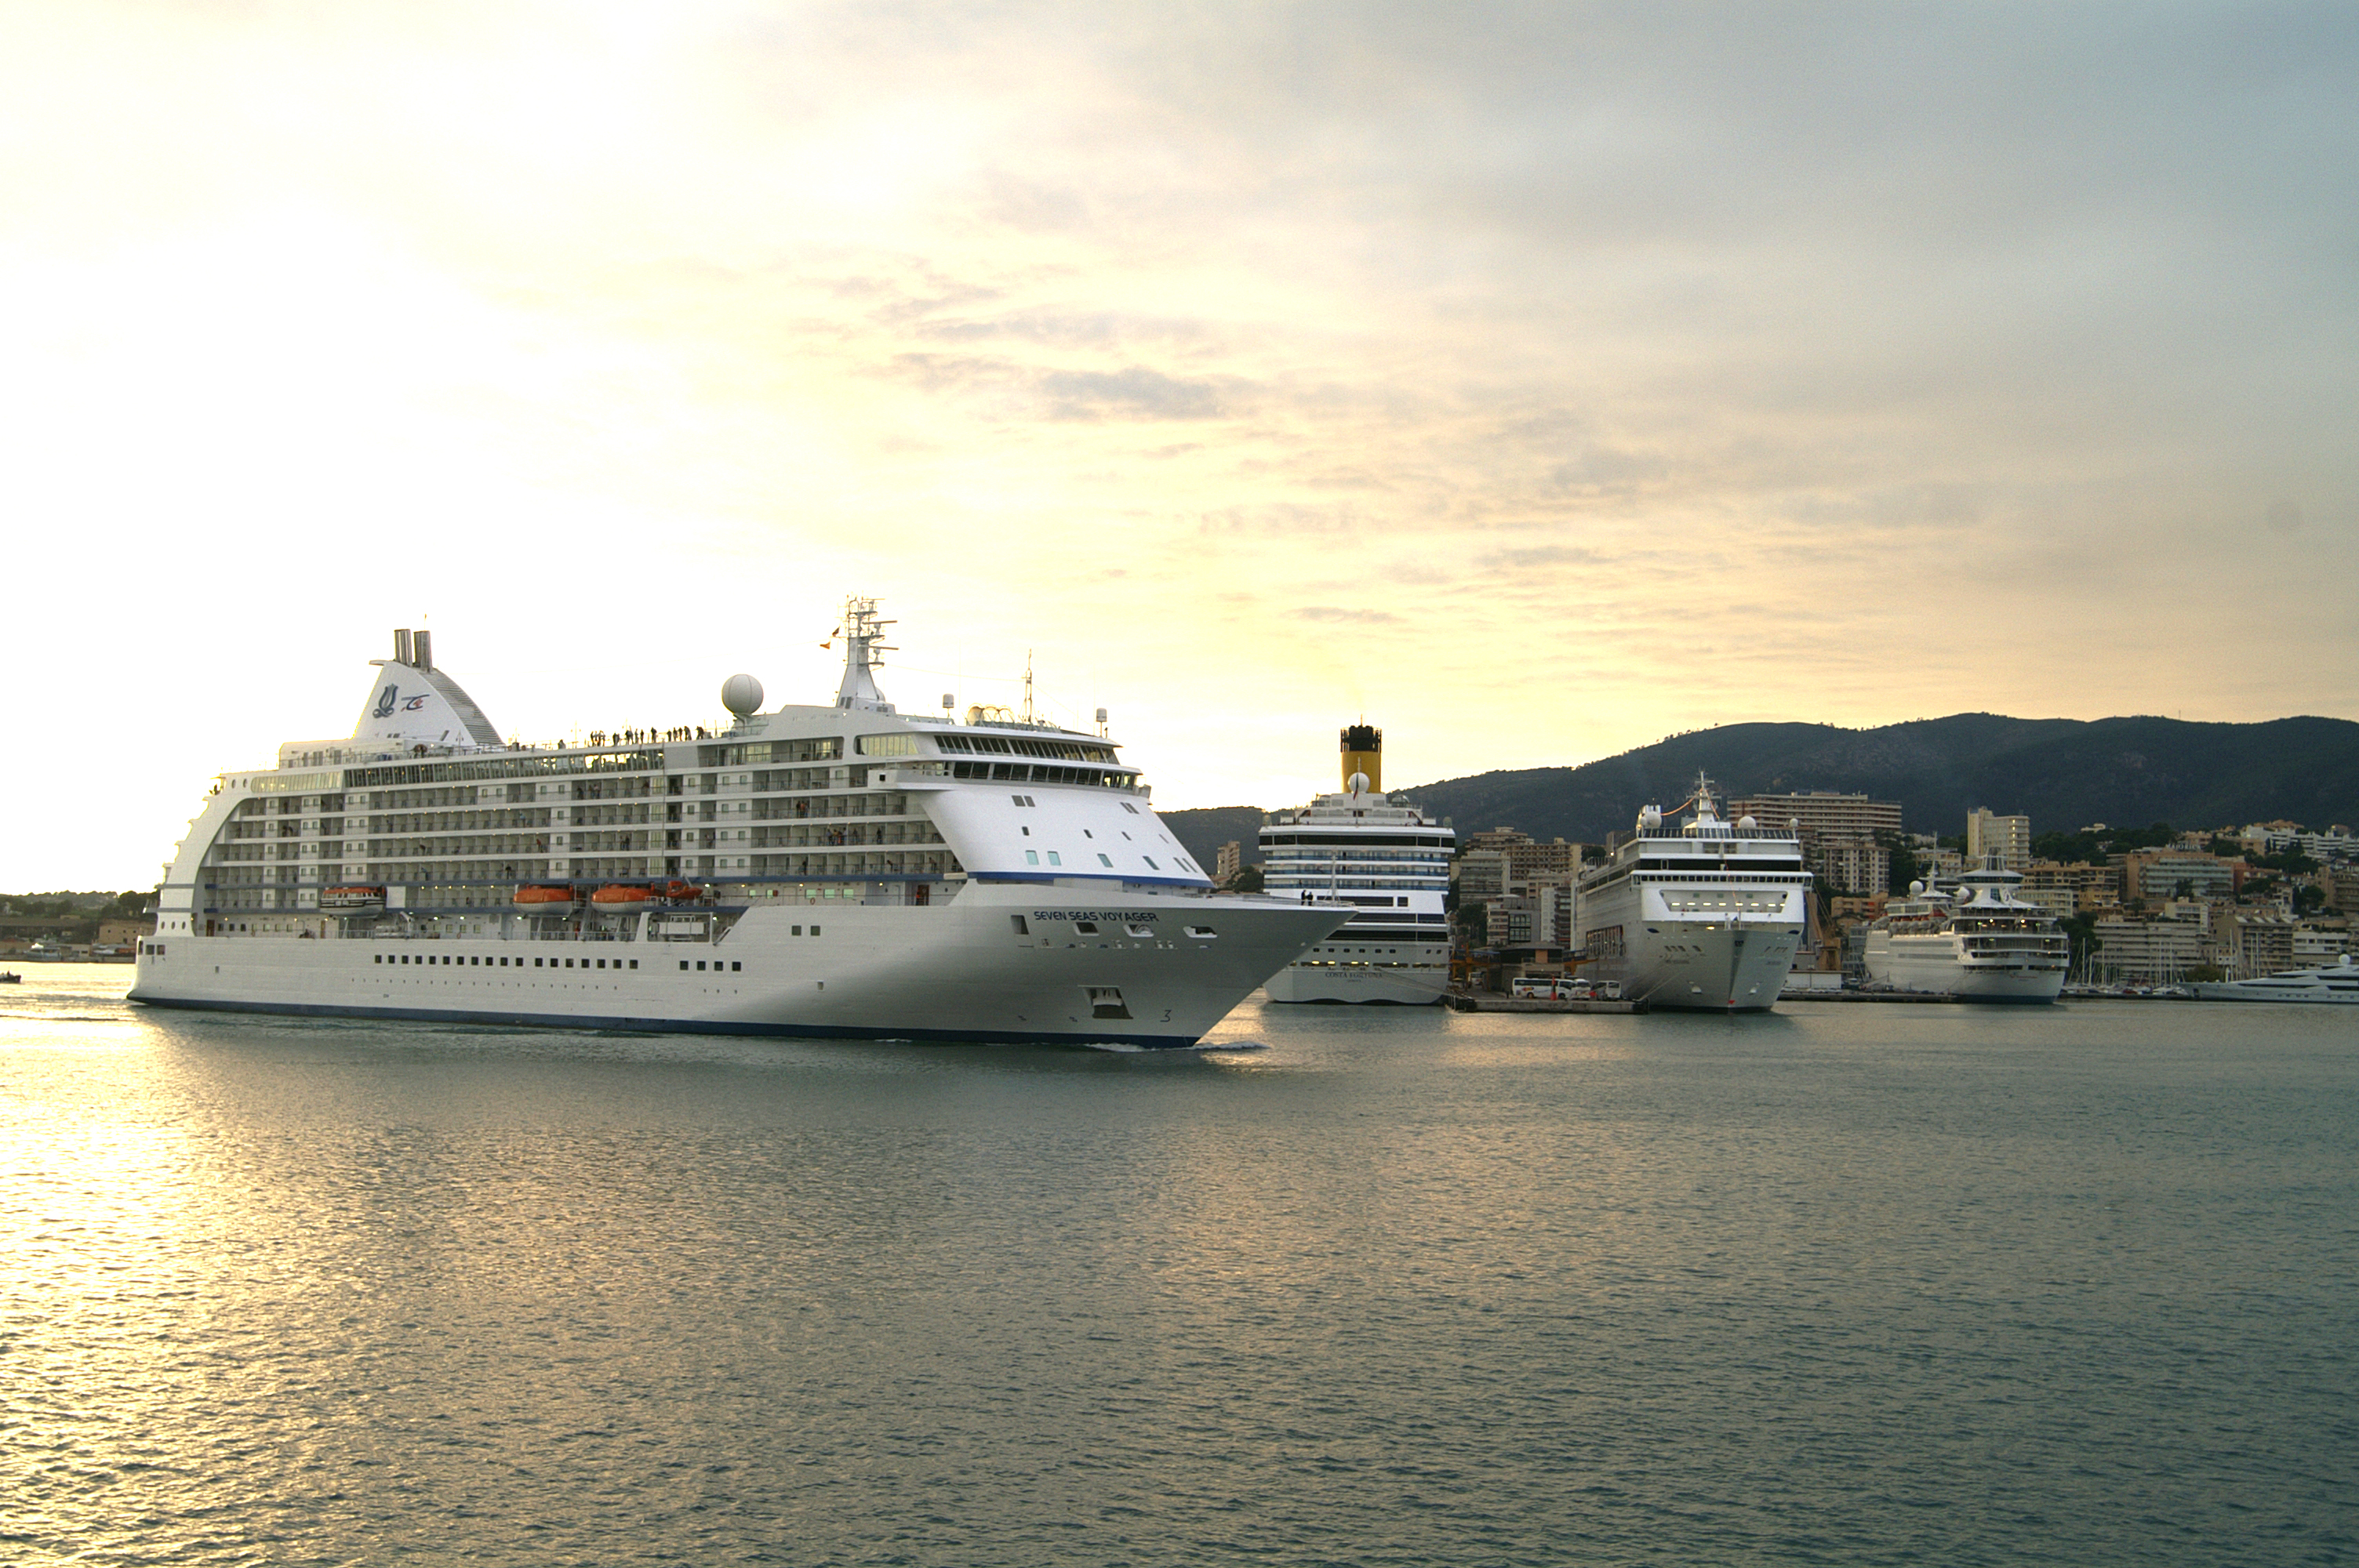 Cruise passengers consume 90 litres of water per year in the Port of Palma